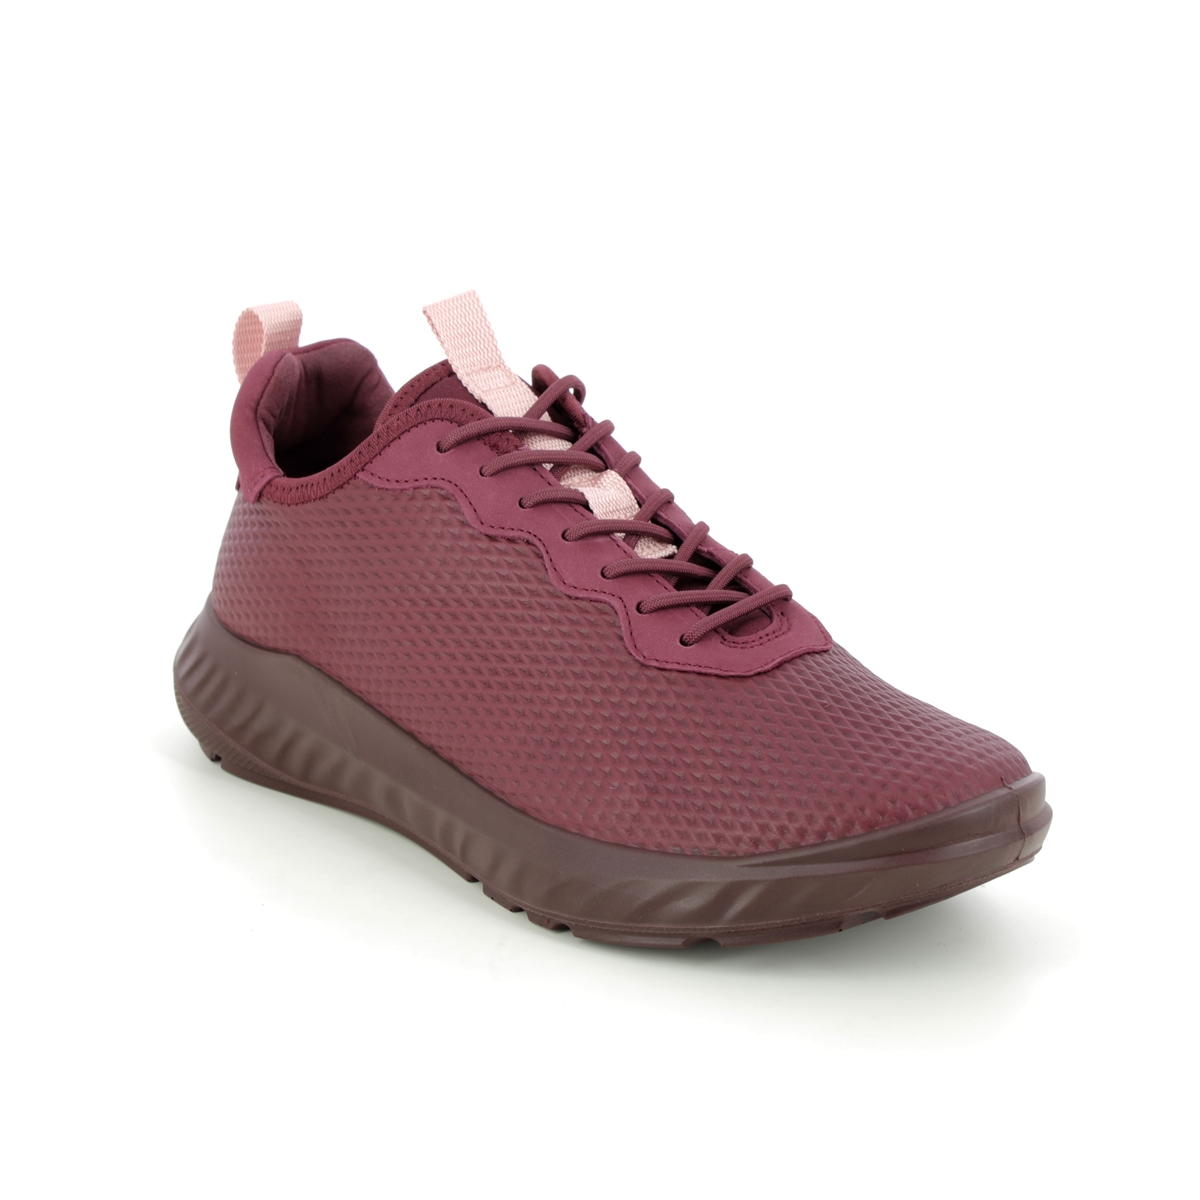 Ecco Ath 1Fw Plum Womens Trainers 834903-60501 In Size 37 In Plain Plum